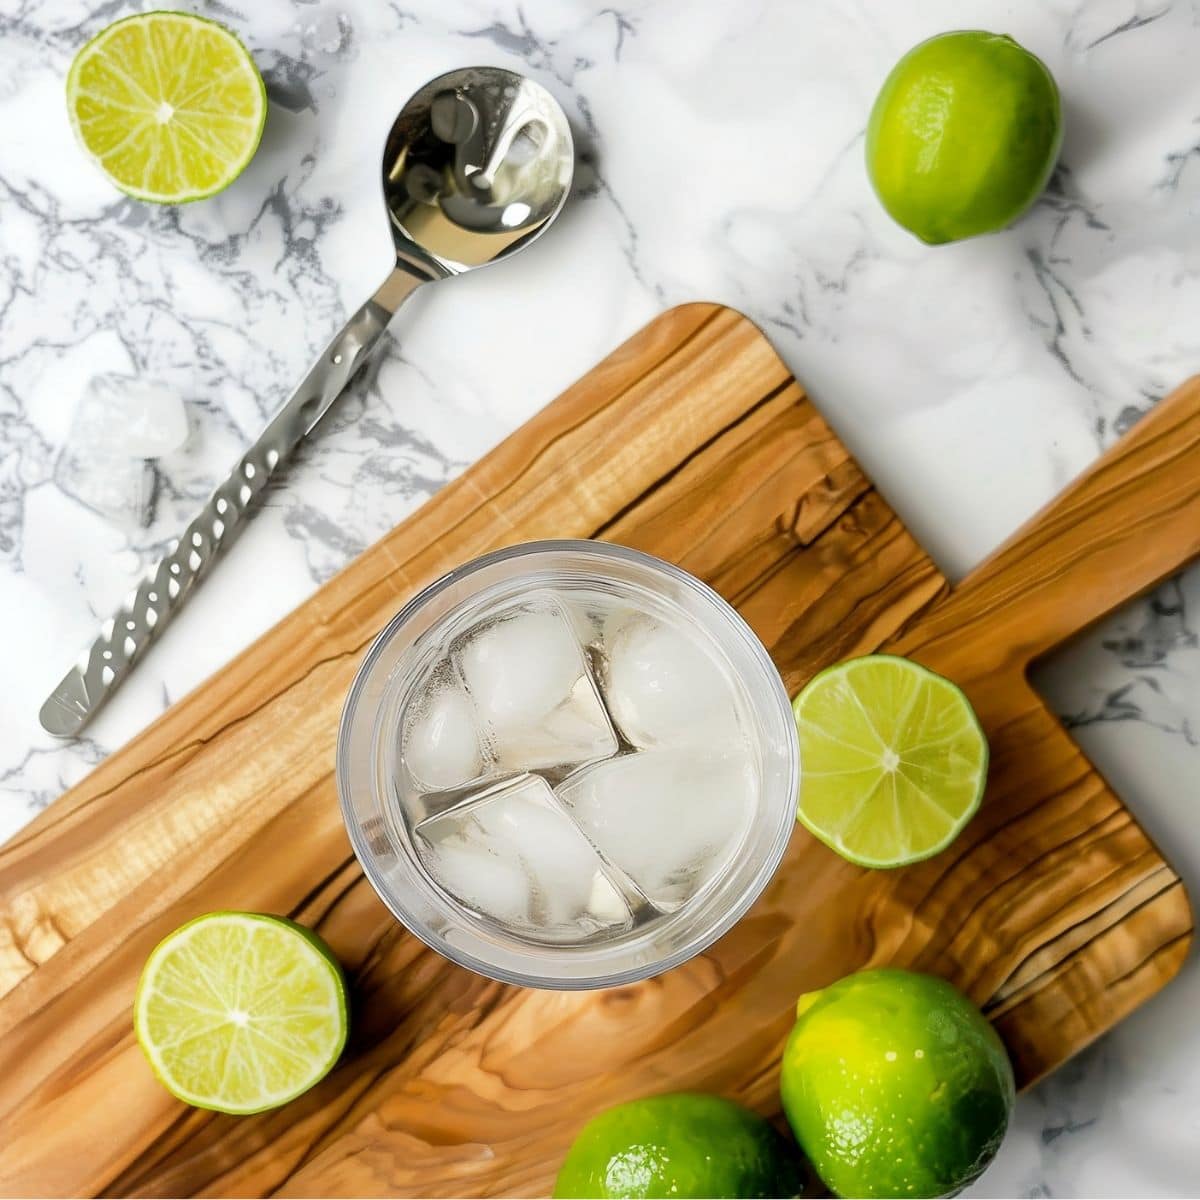 Top View of Gin and Tonic in a Glass with Ice on a Wooden Cutting Board on a White Marble Table with Whole and Halved Limes and a Silver Stirring Spoon